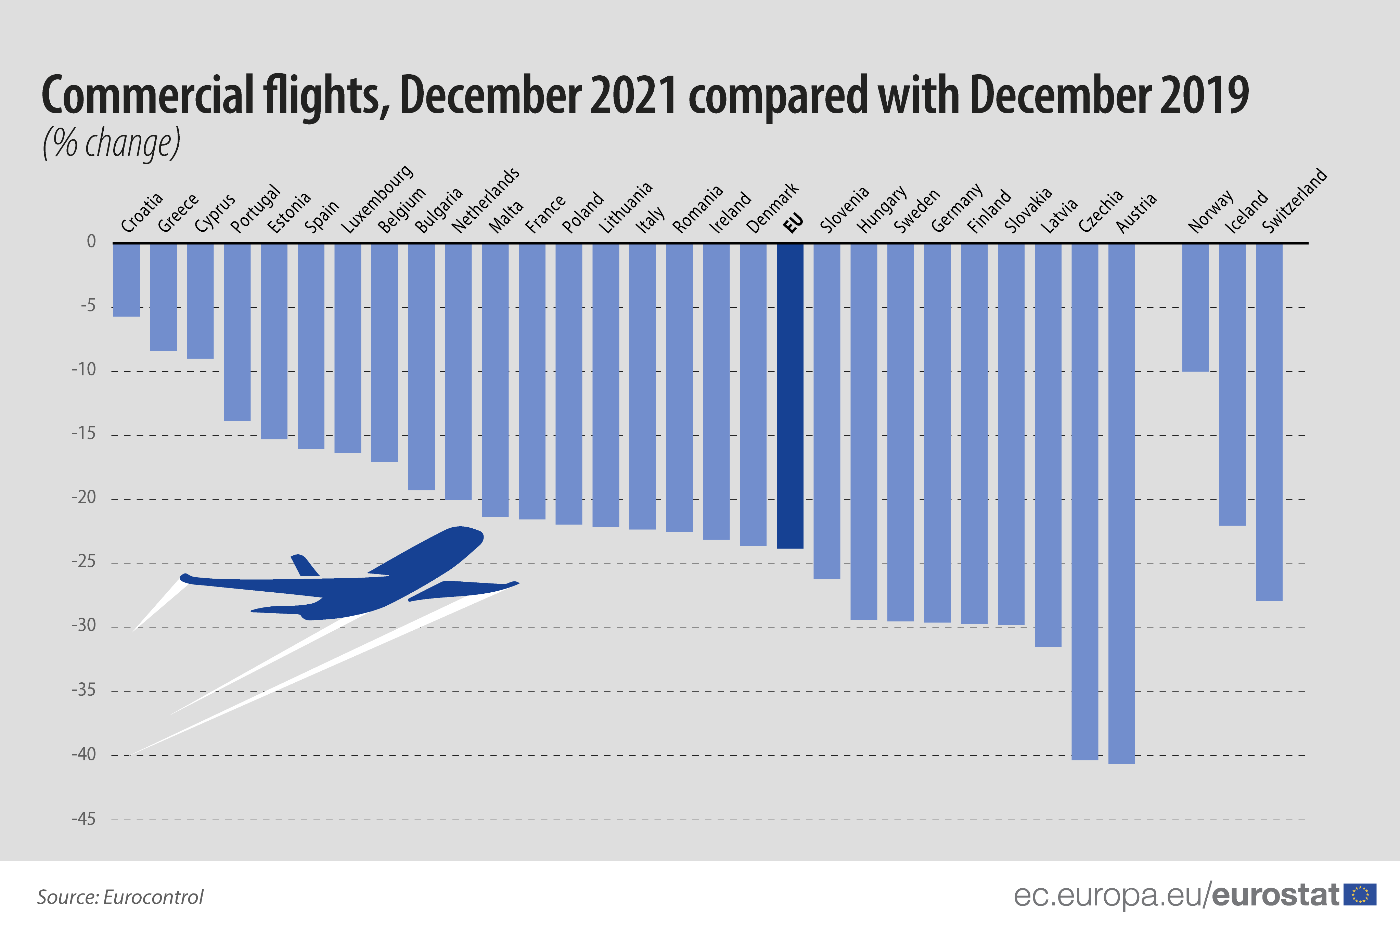 Bar graph: Commercial flights December 2021 compared with December 2019, % change, in the EU and EFTA countries 